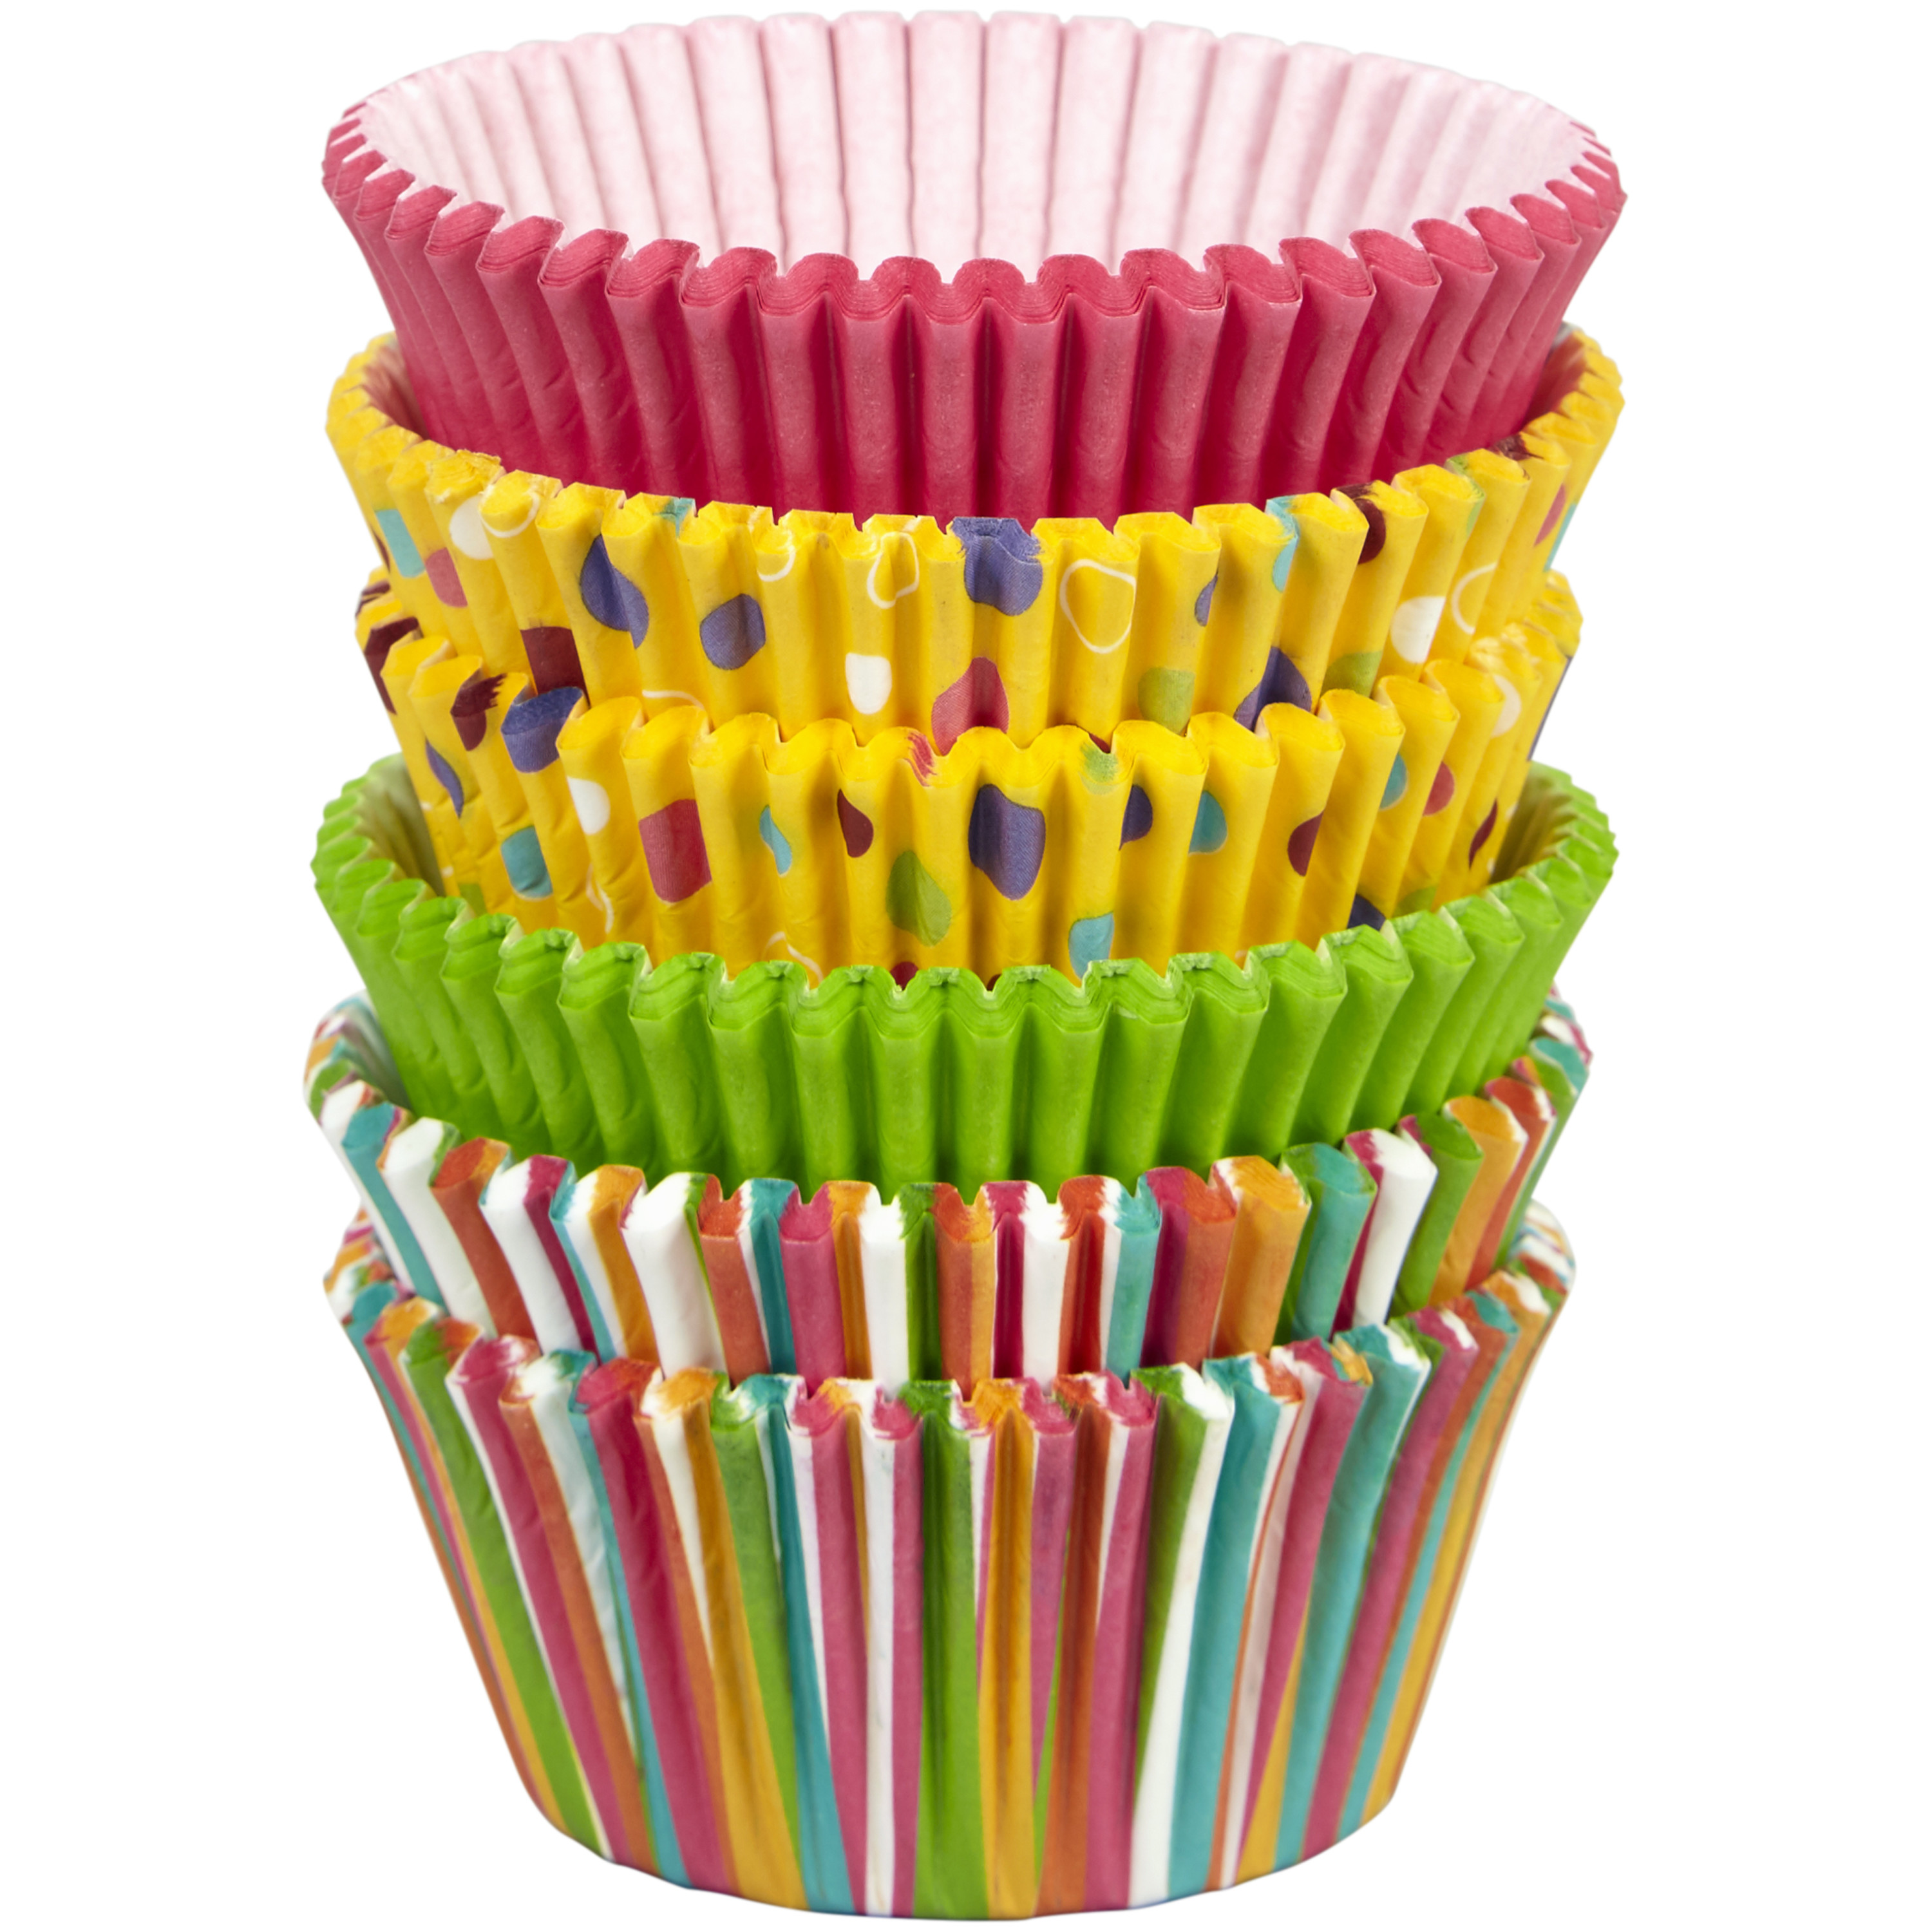 Wilton Stripes and Polka Dots Standard Cupcake Liners, 150-Count - image 3 of 4